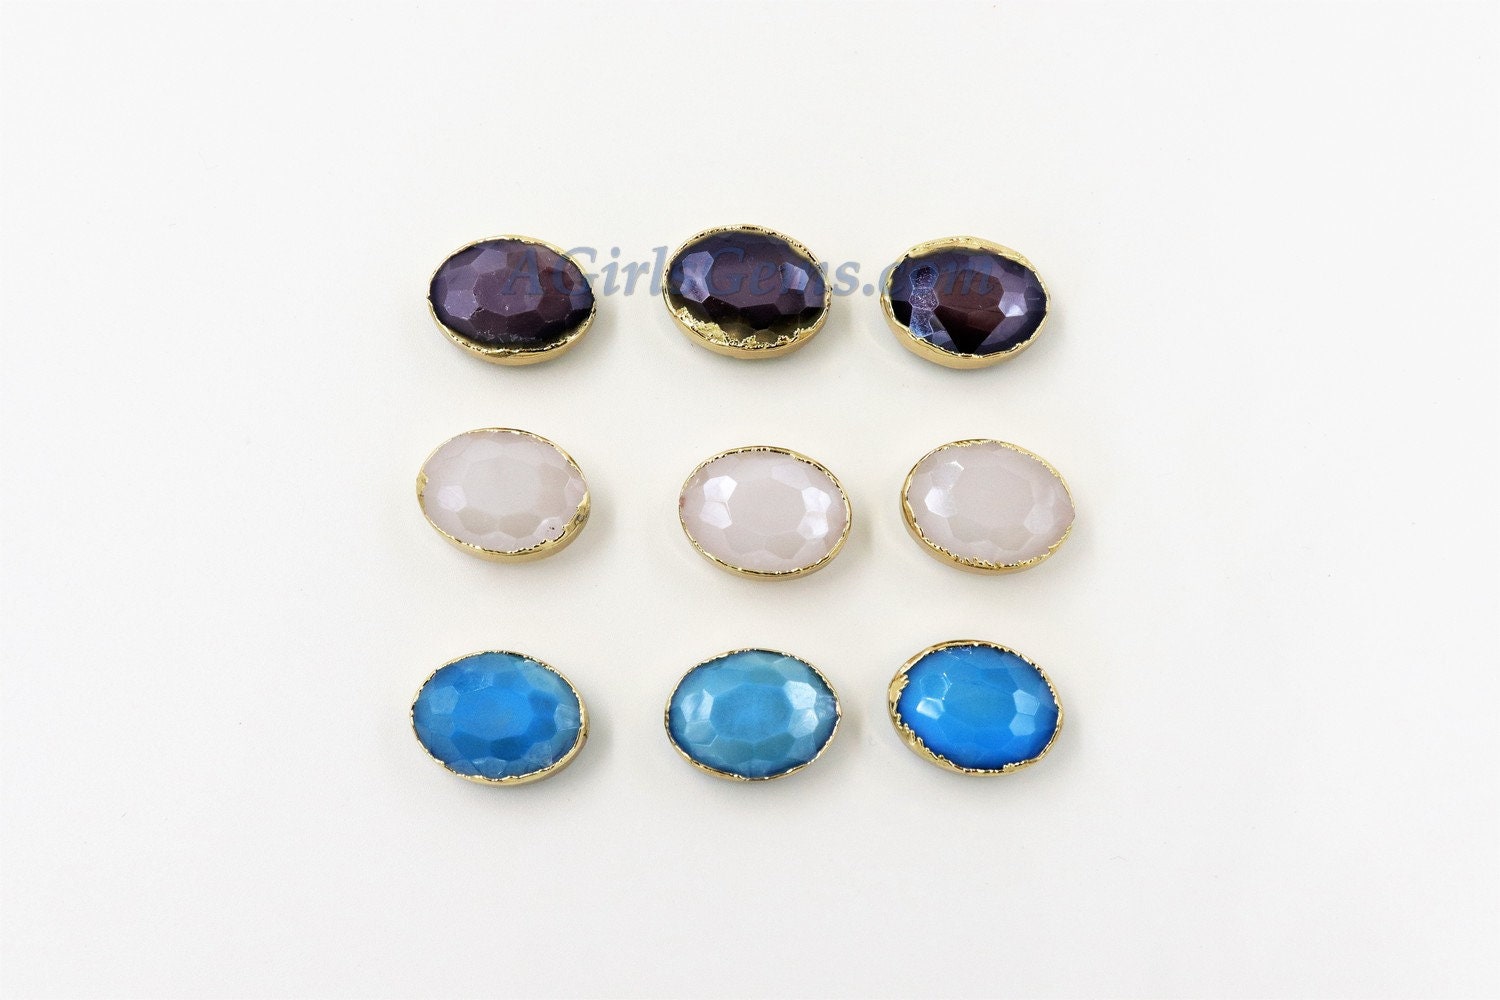 Crystal Beads, Crystal Oval Teardrop #959, Soldered Beads Charm Gold Edge Blue